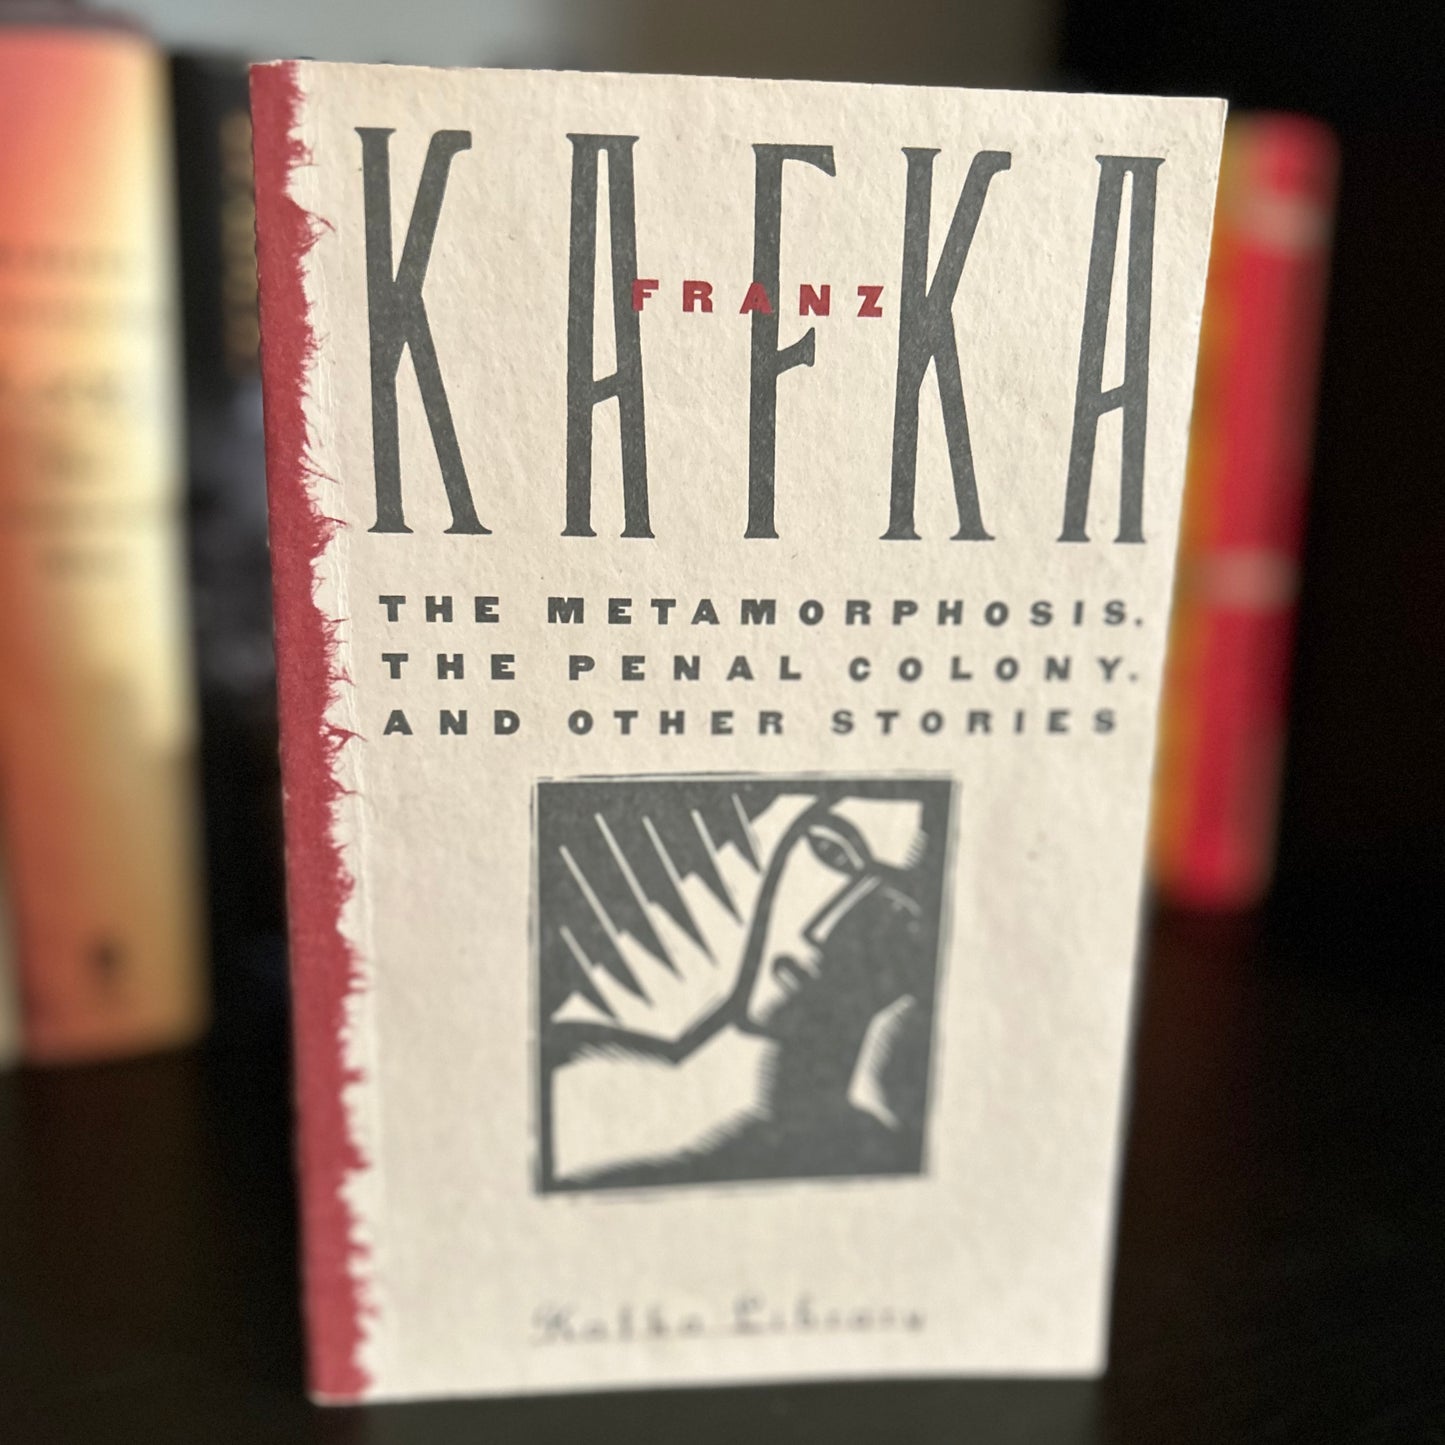 Kafka - The Metamorphosis - The Penal Colony and other stories.